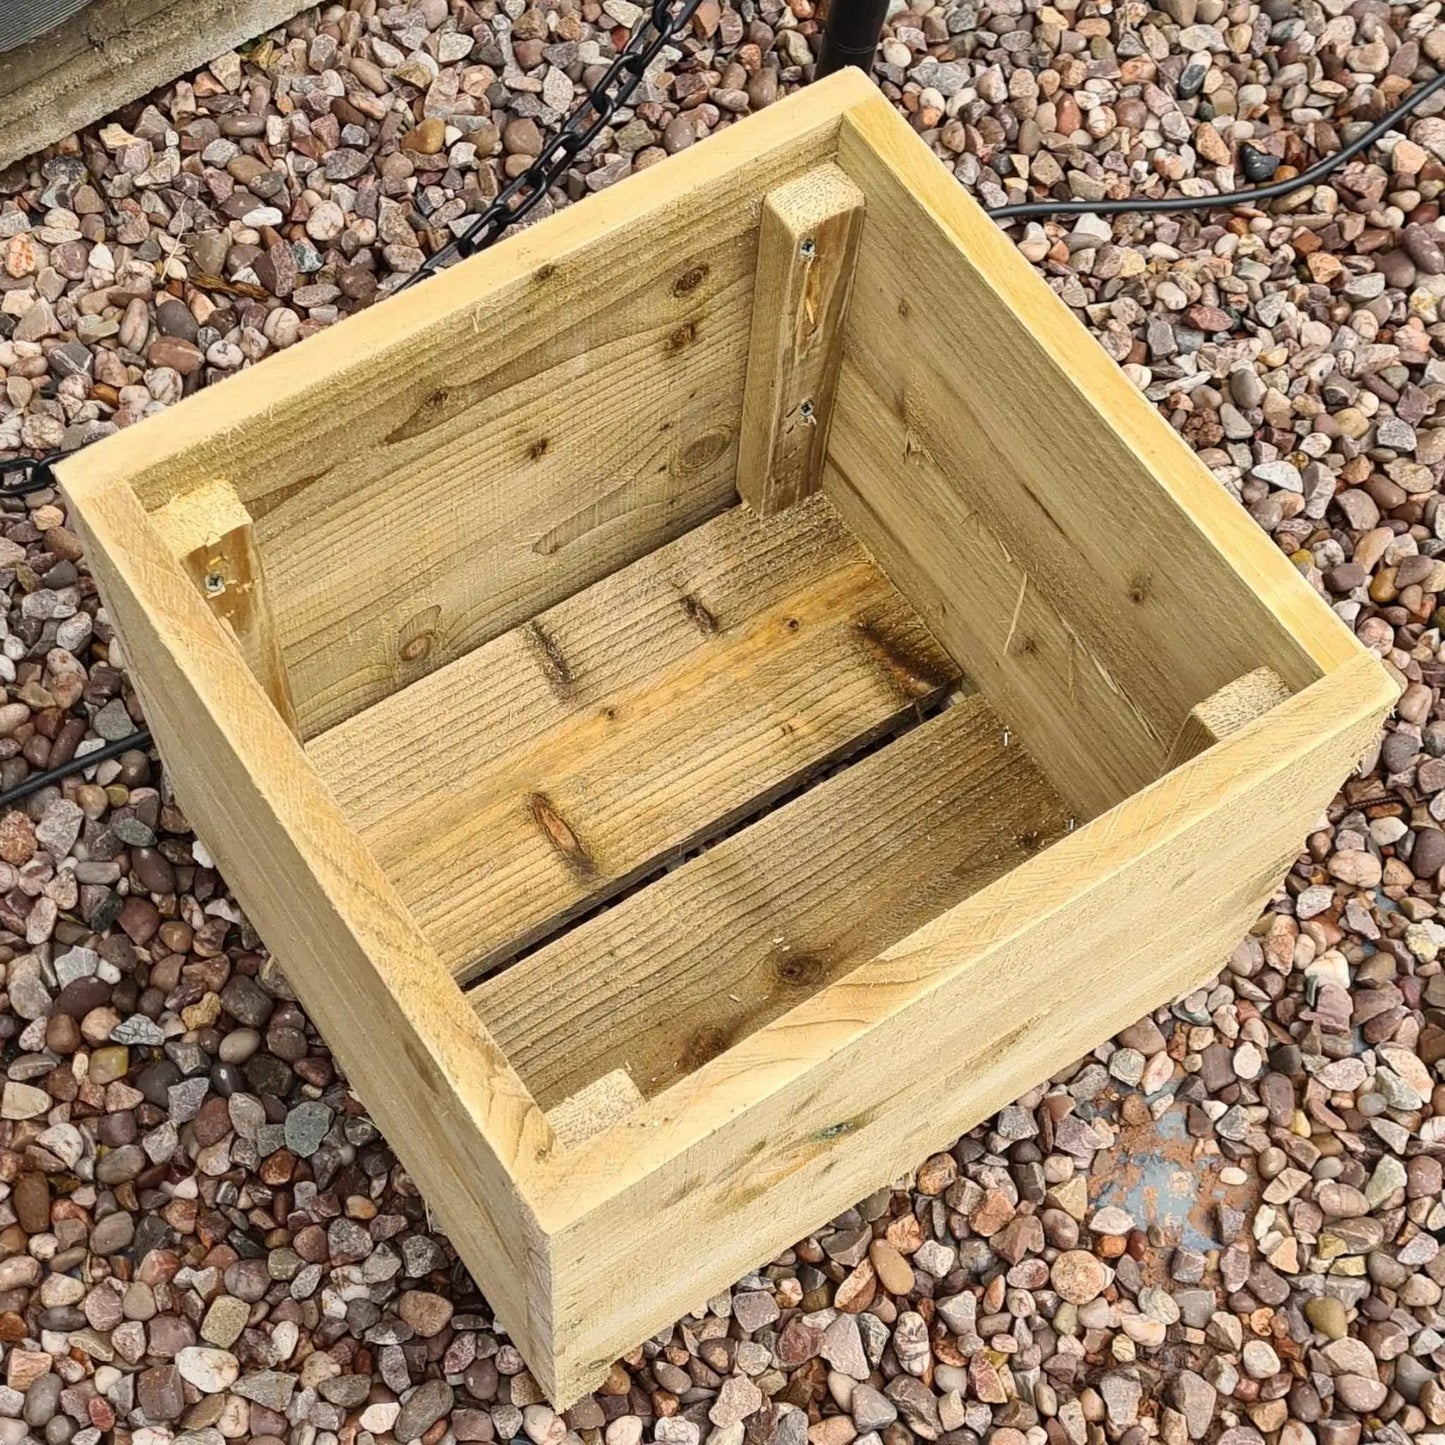 40cm Square wooden Planter in 3 heights - Summer Wooden Planters